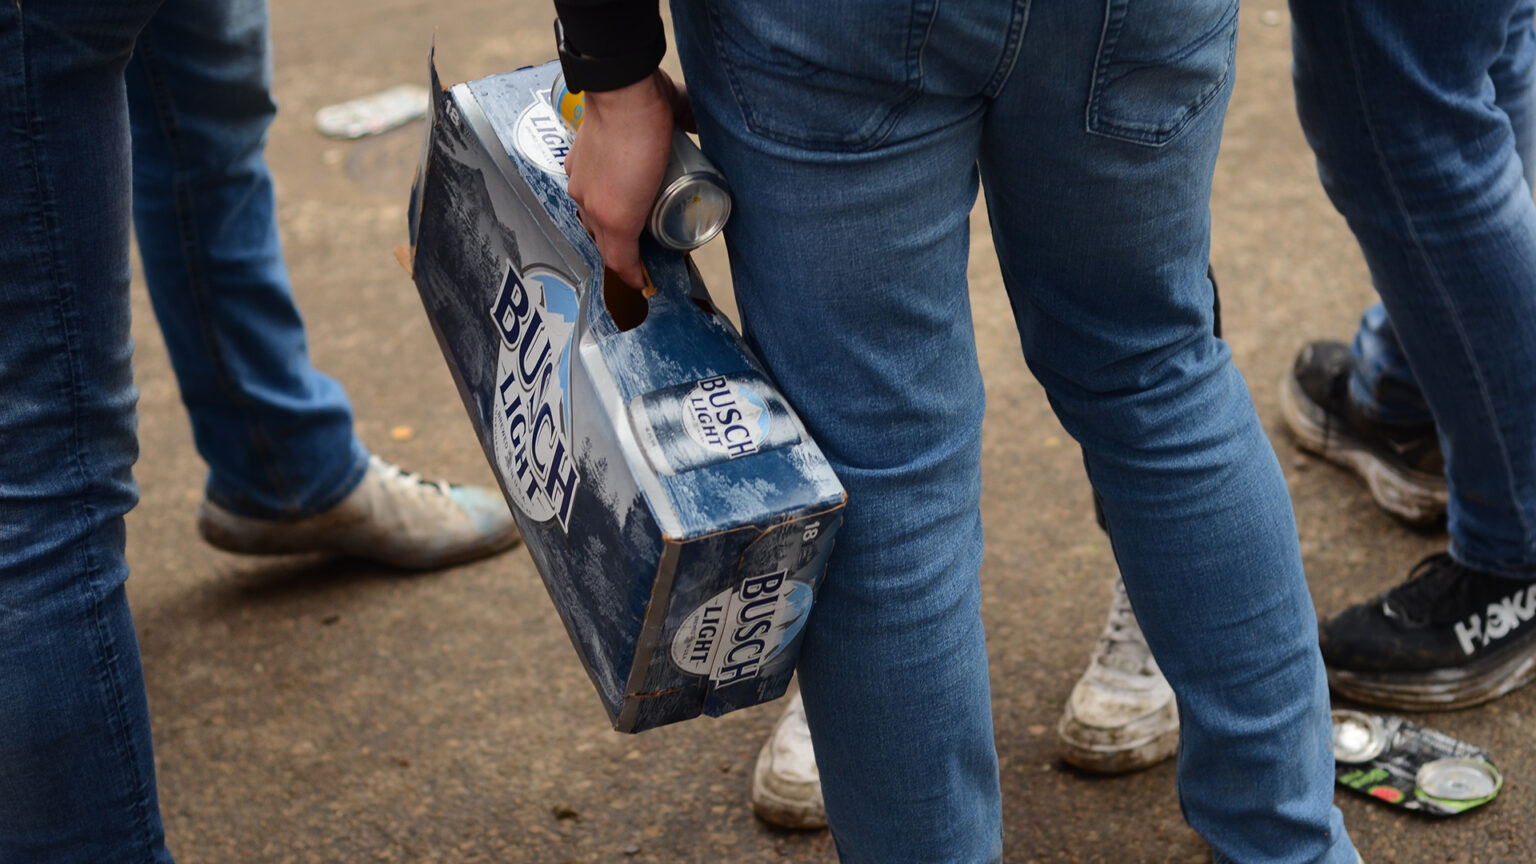 A person standing on pavement among other people holds a can of beer and a cardboard carton of beer cans in their left hand, with multiple crushed cans on the ground.